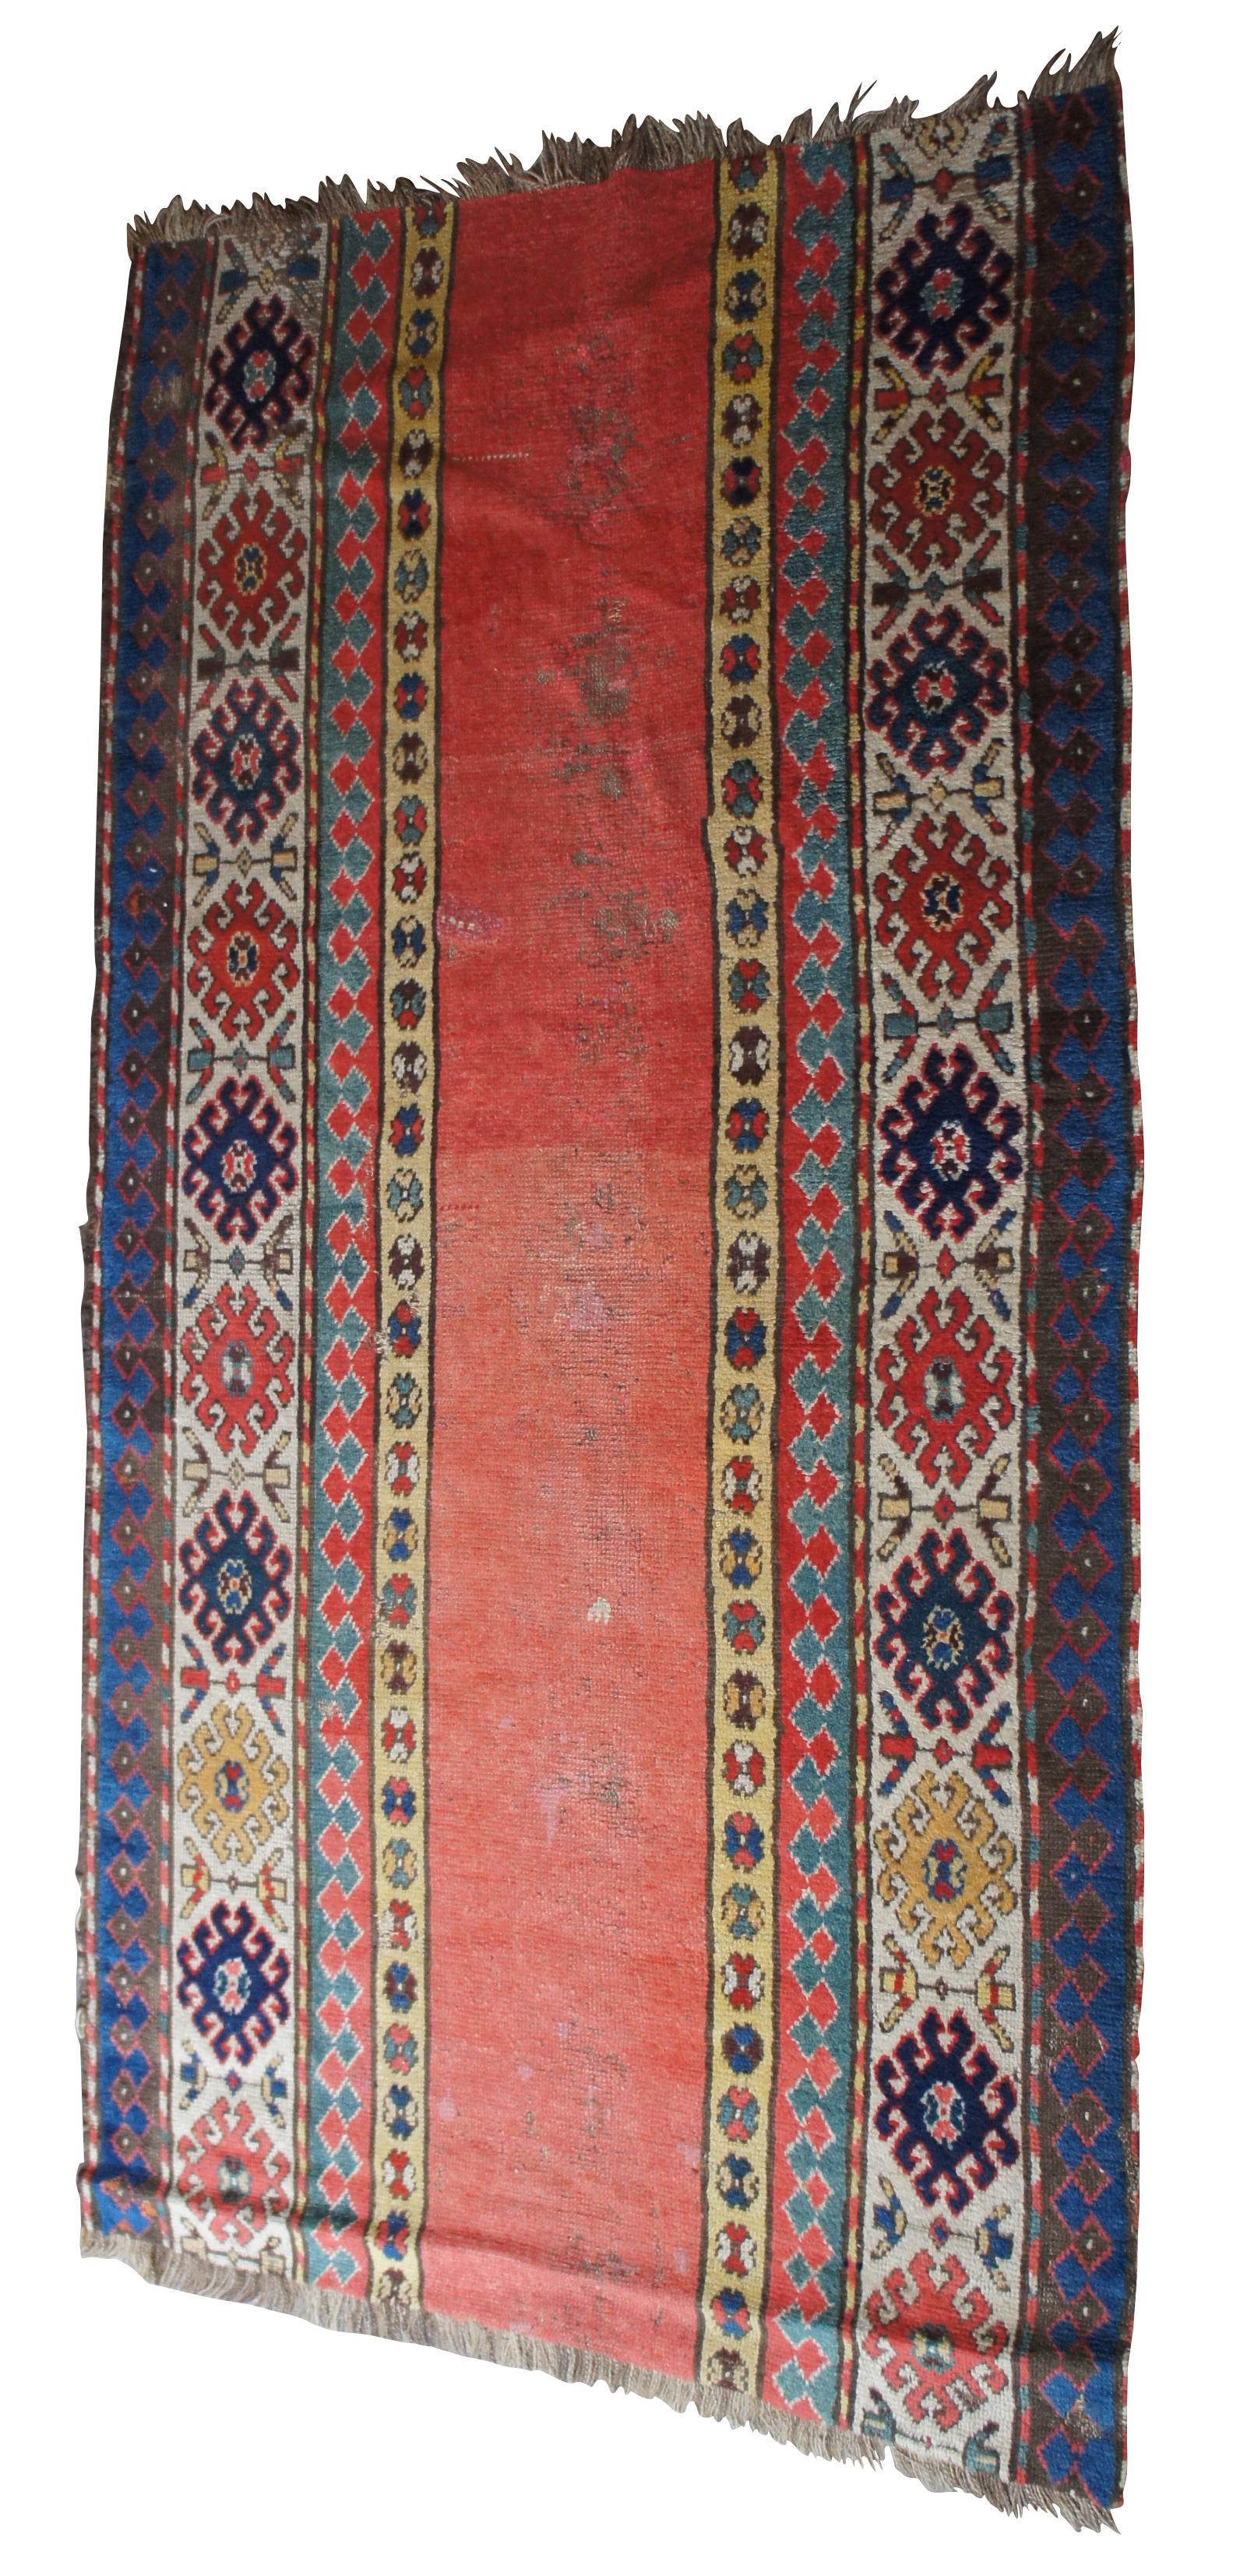 Antique Persian rug runner featuring long floral and geometric designs. Reds, greens, blues, brown, yellow, tan, pink. Measure: 73